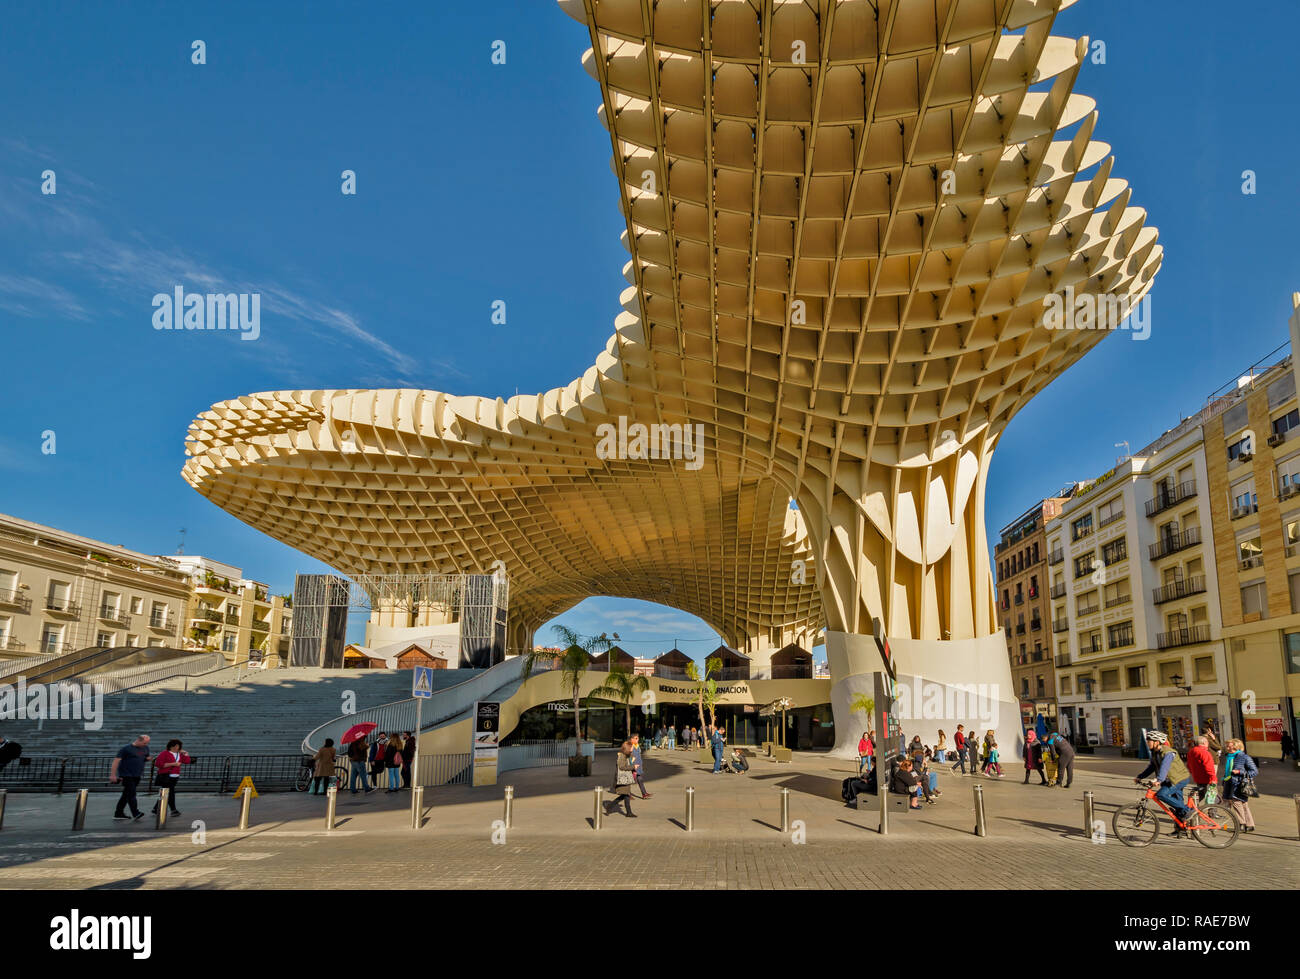 METROPOL PARASOL ENCARNACION SQUARE  SEVILLE SPAIN EARLY MORNING THE ROOF STRUCTURE AND SURROUNDING HOUSES Stock Photo